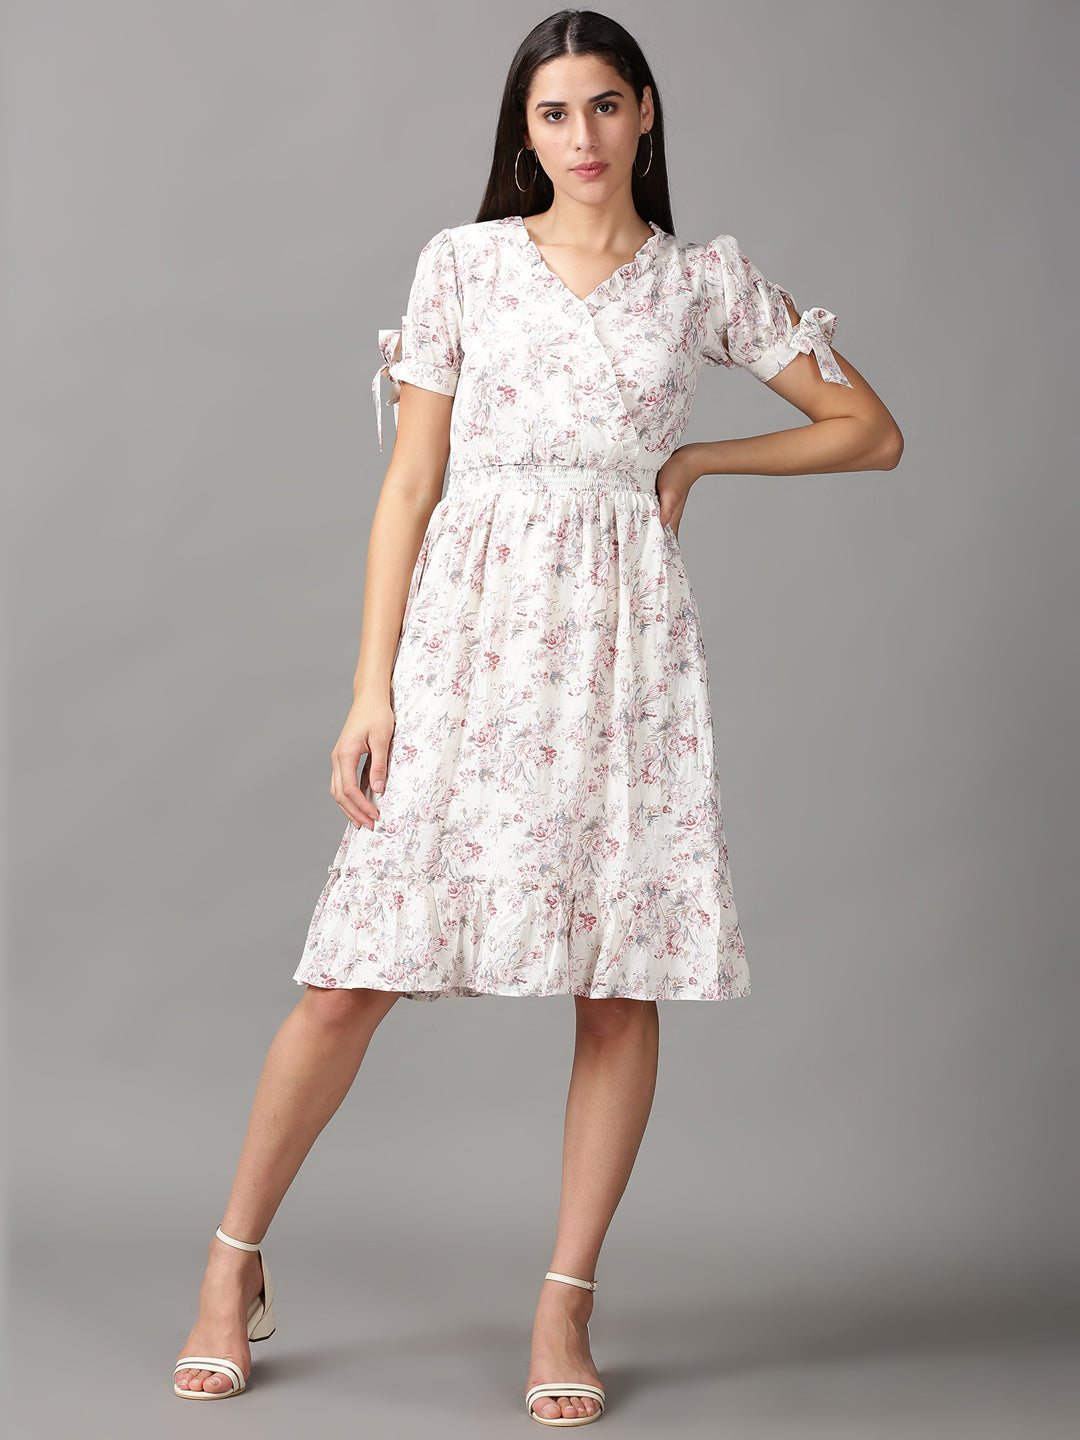 Women's CreamPink Floral Fit and Flare Dress